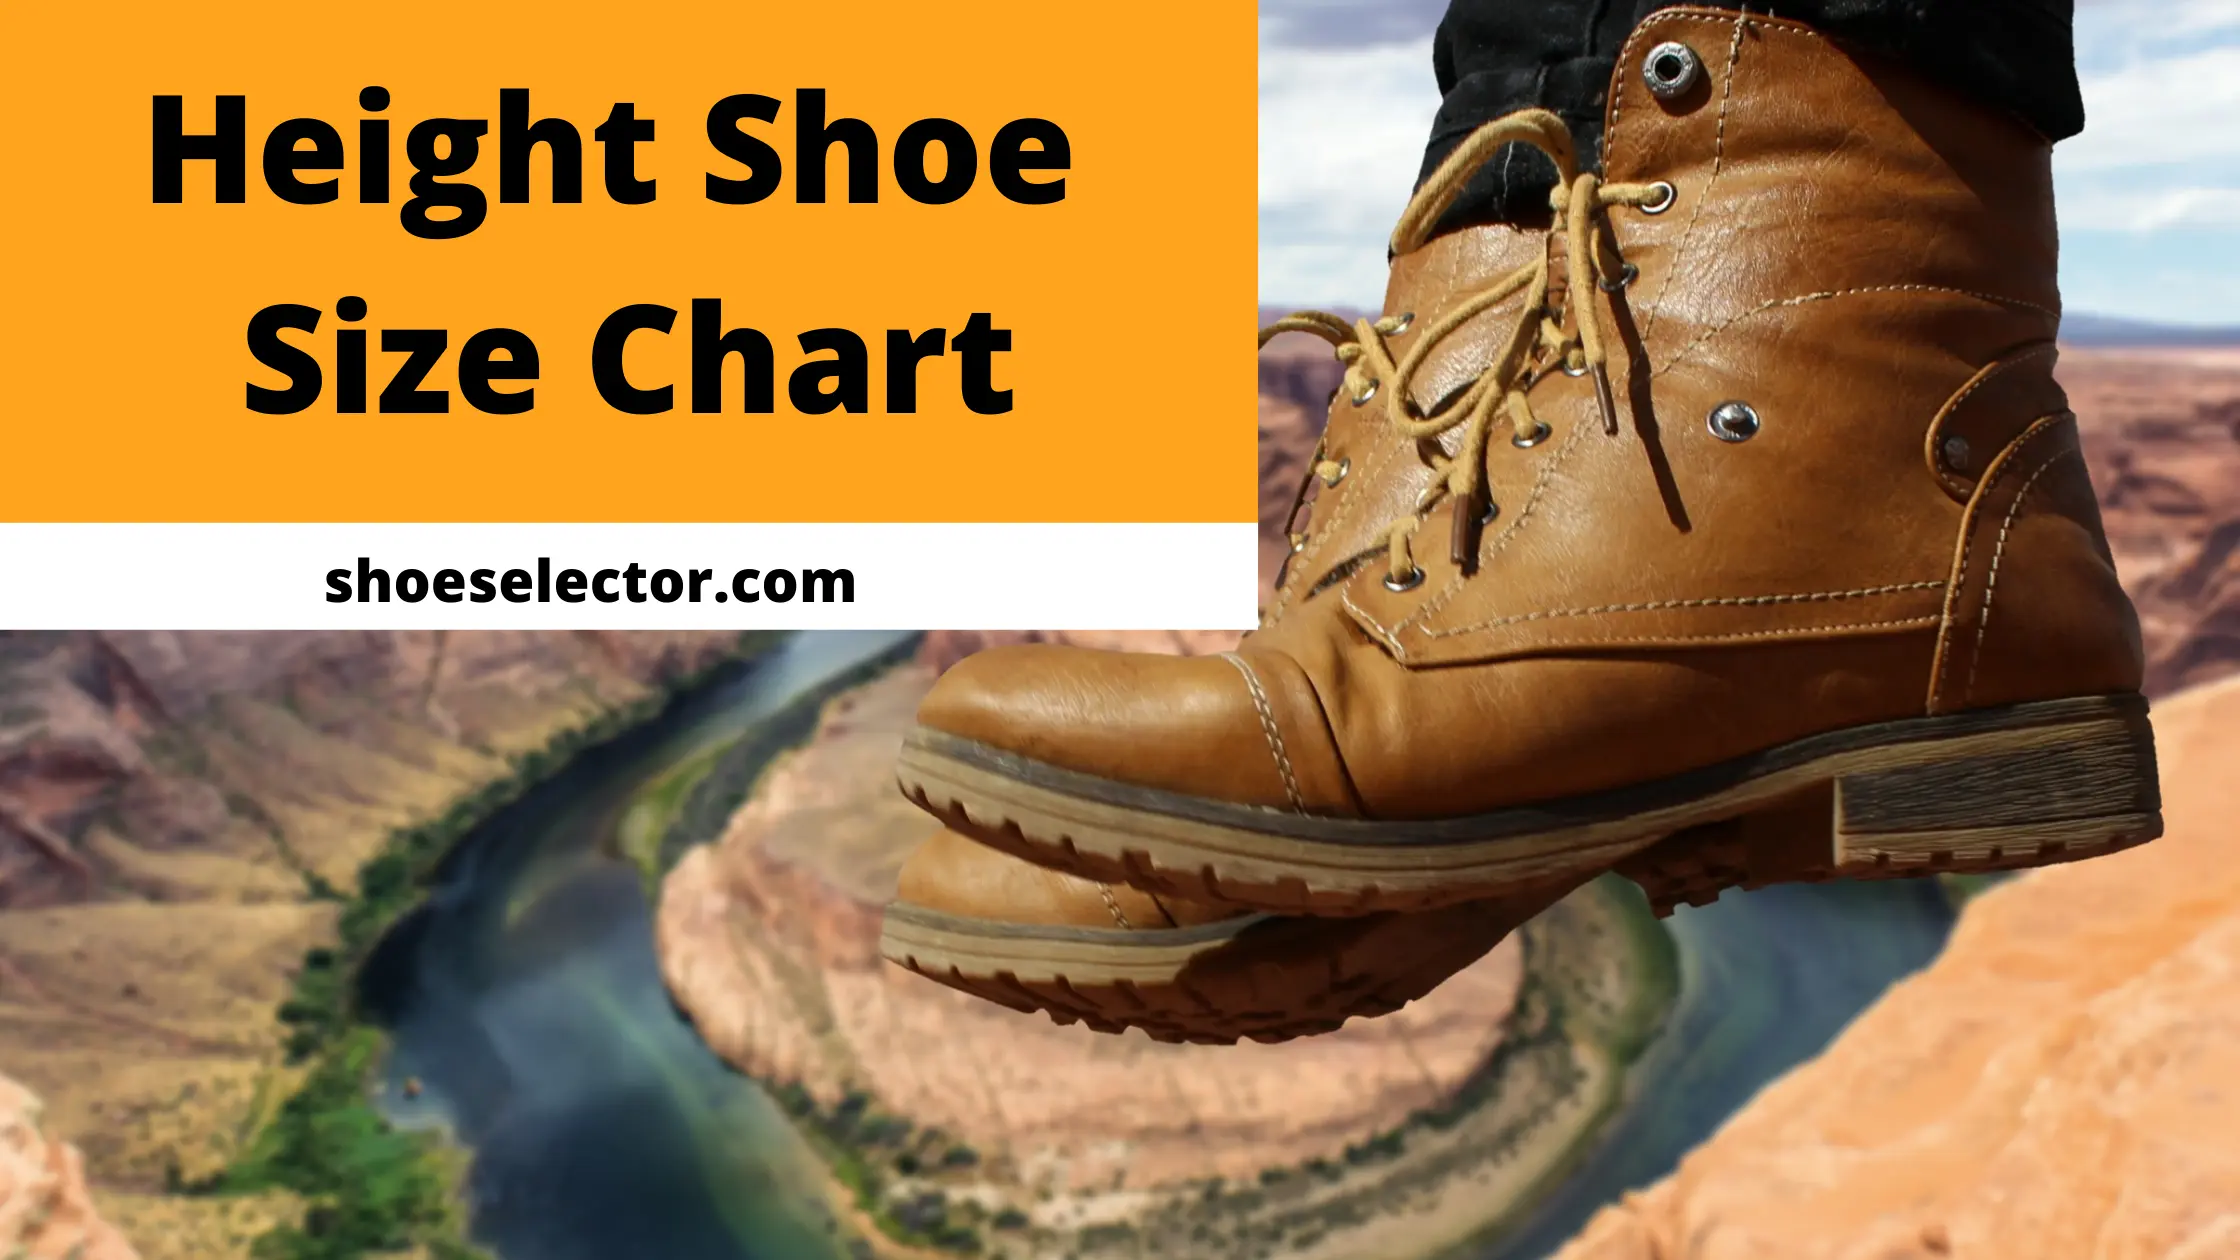 Height Shoe Size Chart by Age - - Latest Guide